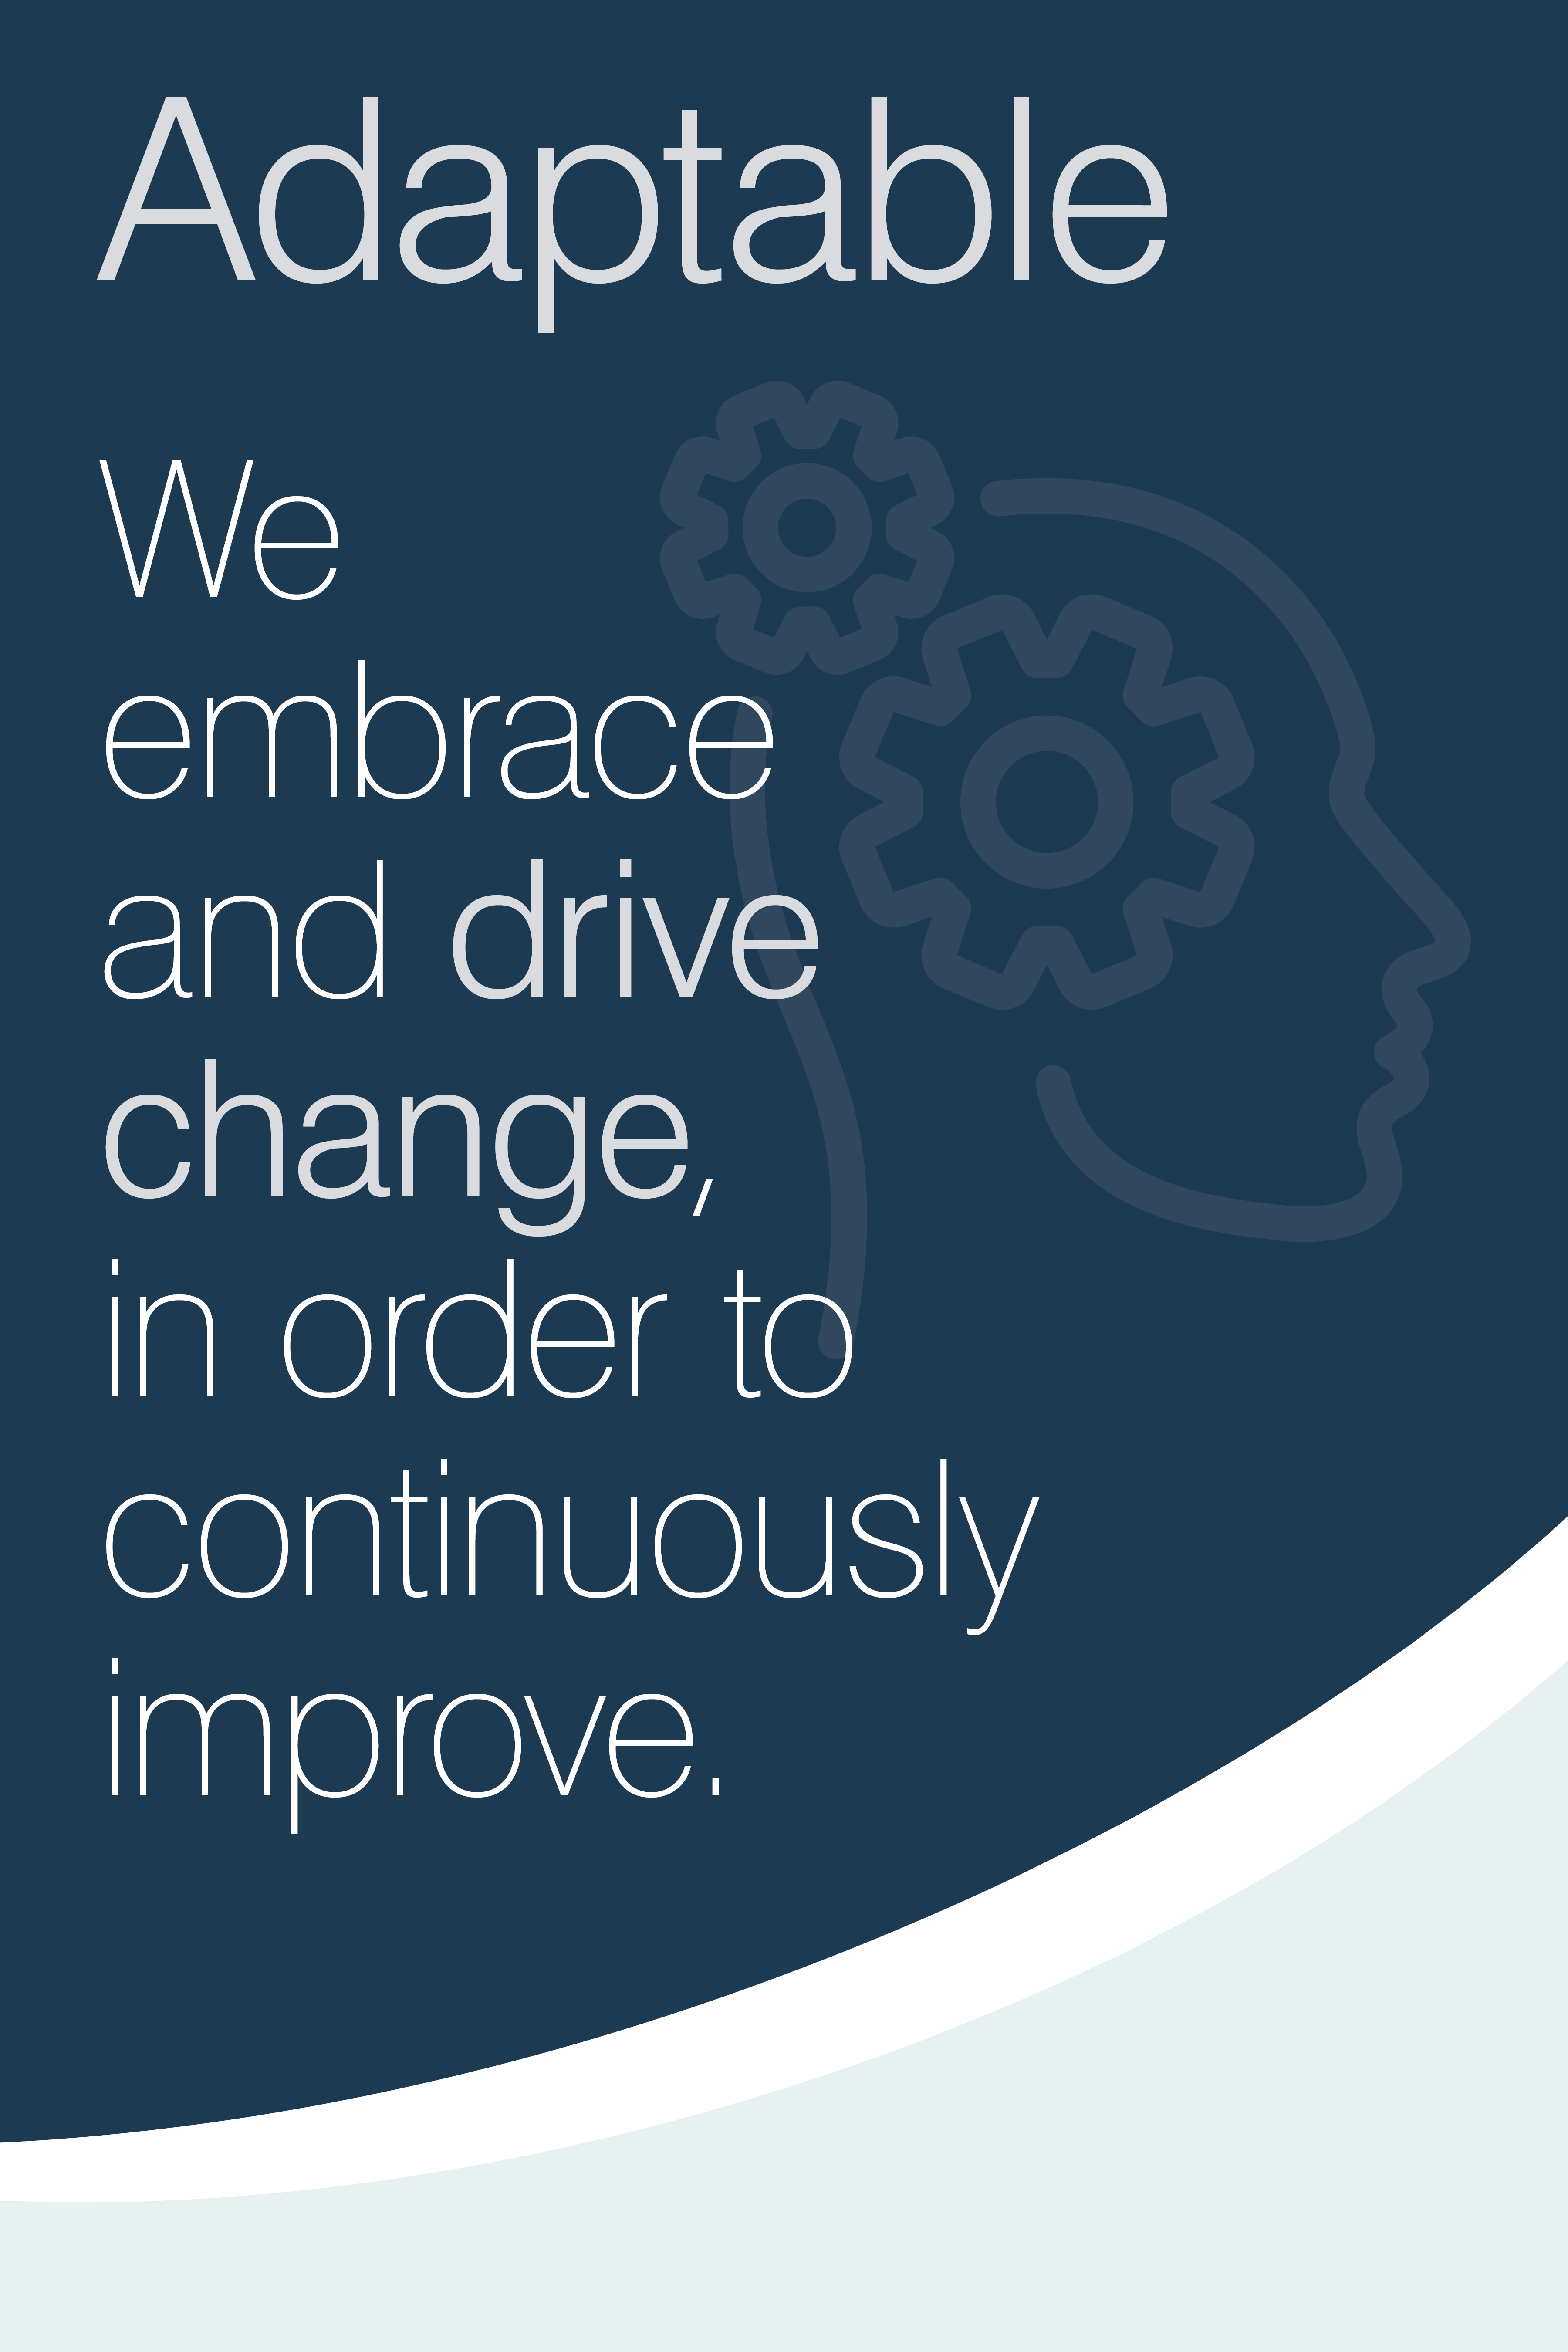 Poster text: Adaptable. We embrace and drive change, in order to continuously improve.